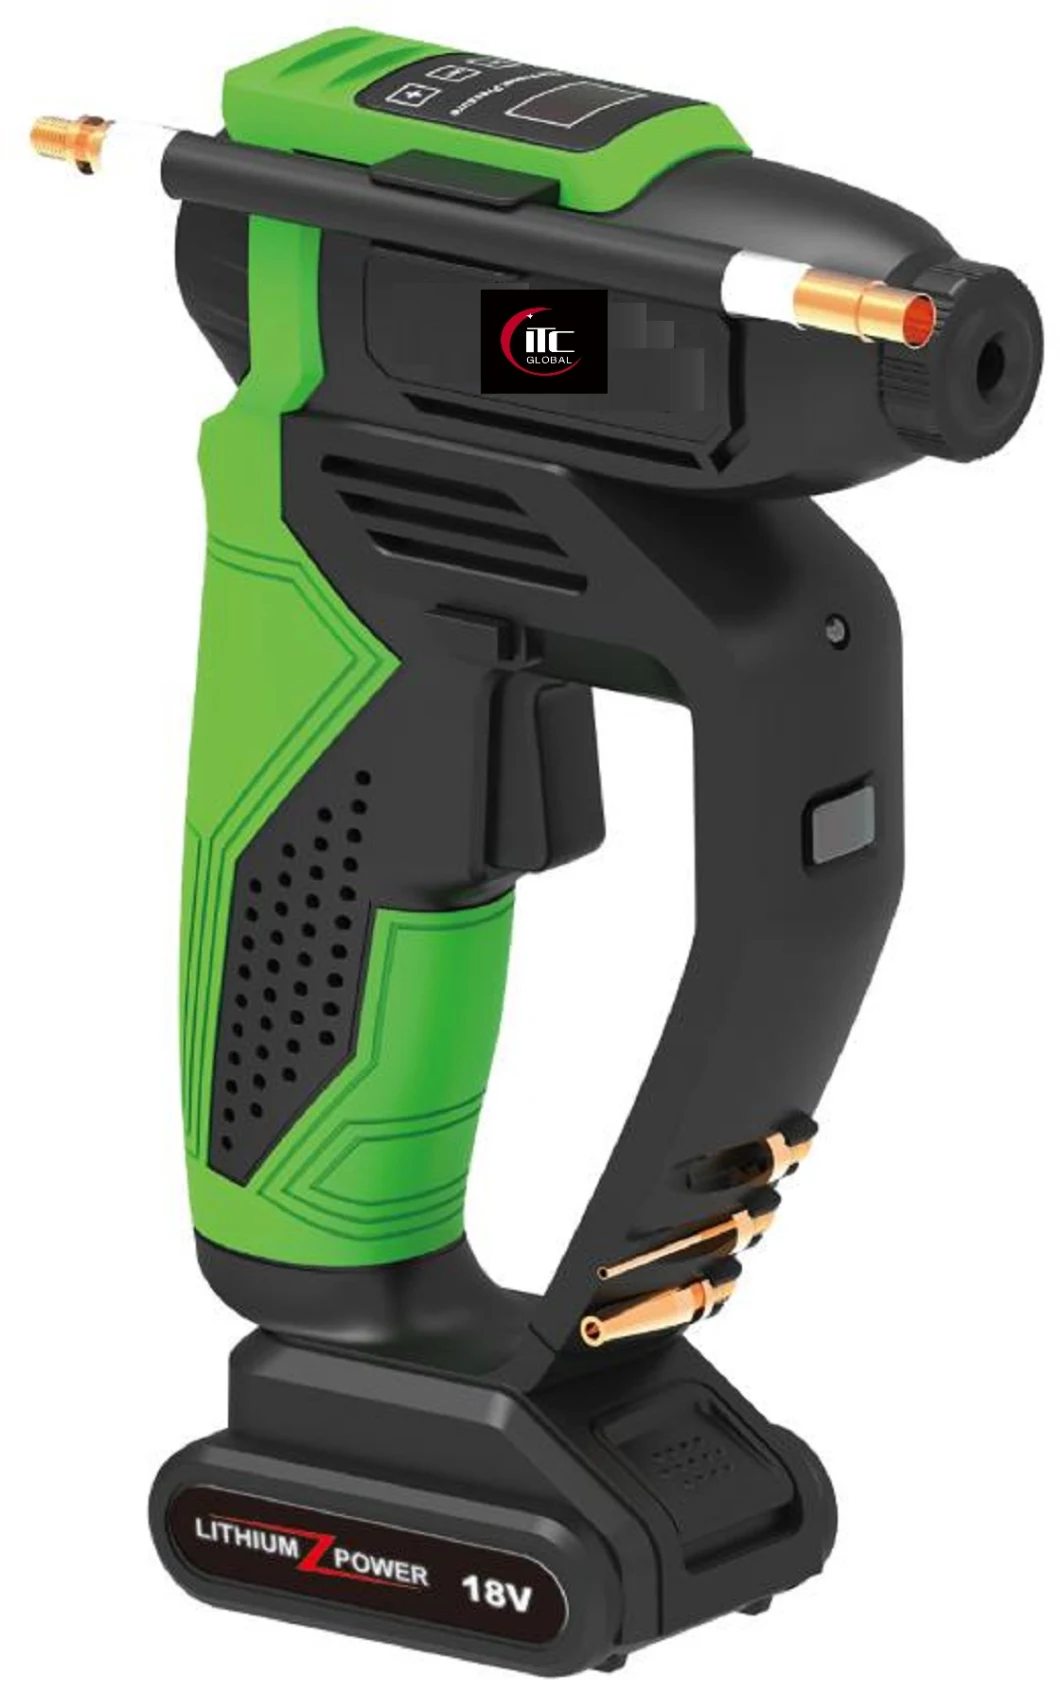 Brushless Powerful Motor-Greenline Li-ion Battery Cordless/Electric Impact Drill/Driver-Power Tools